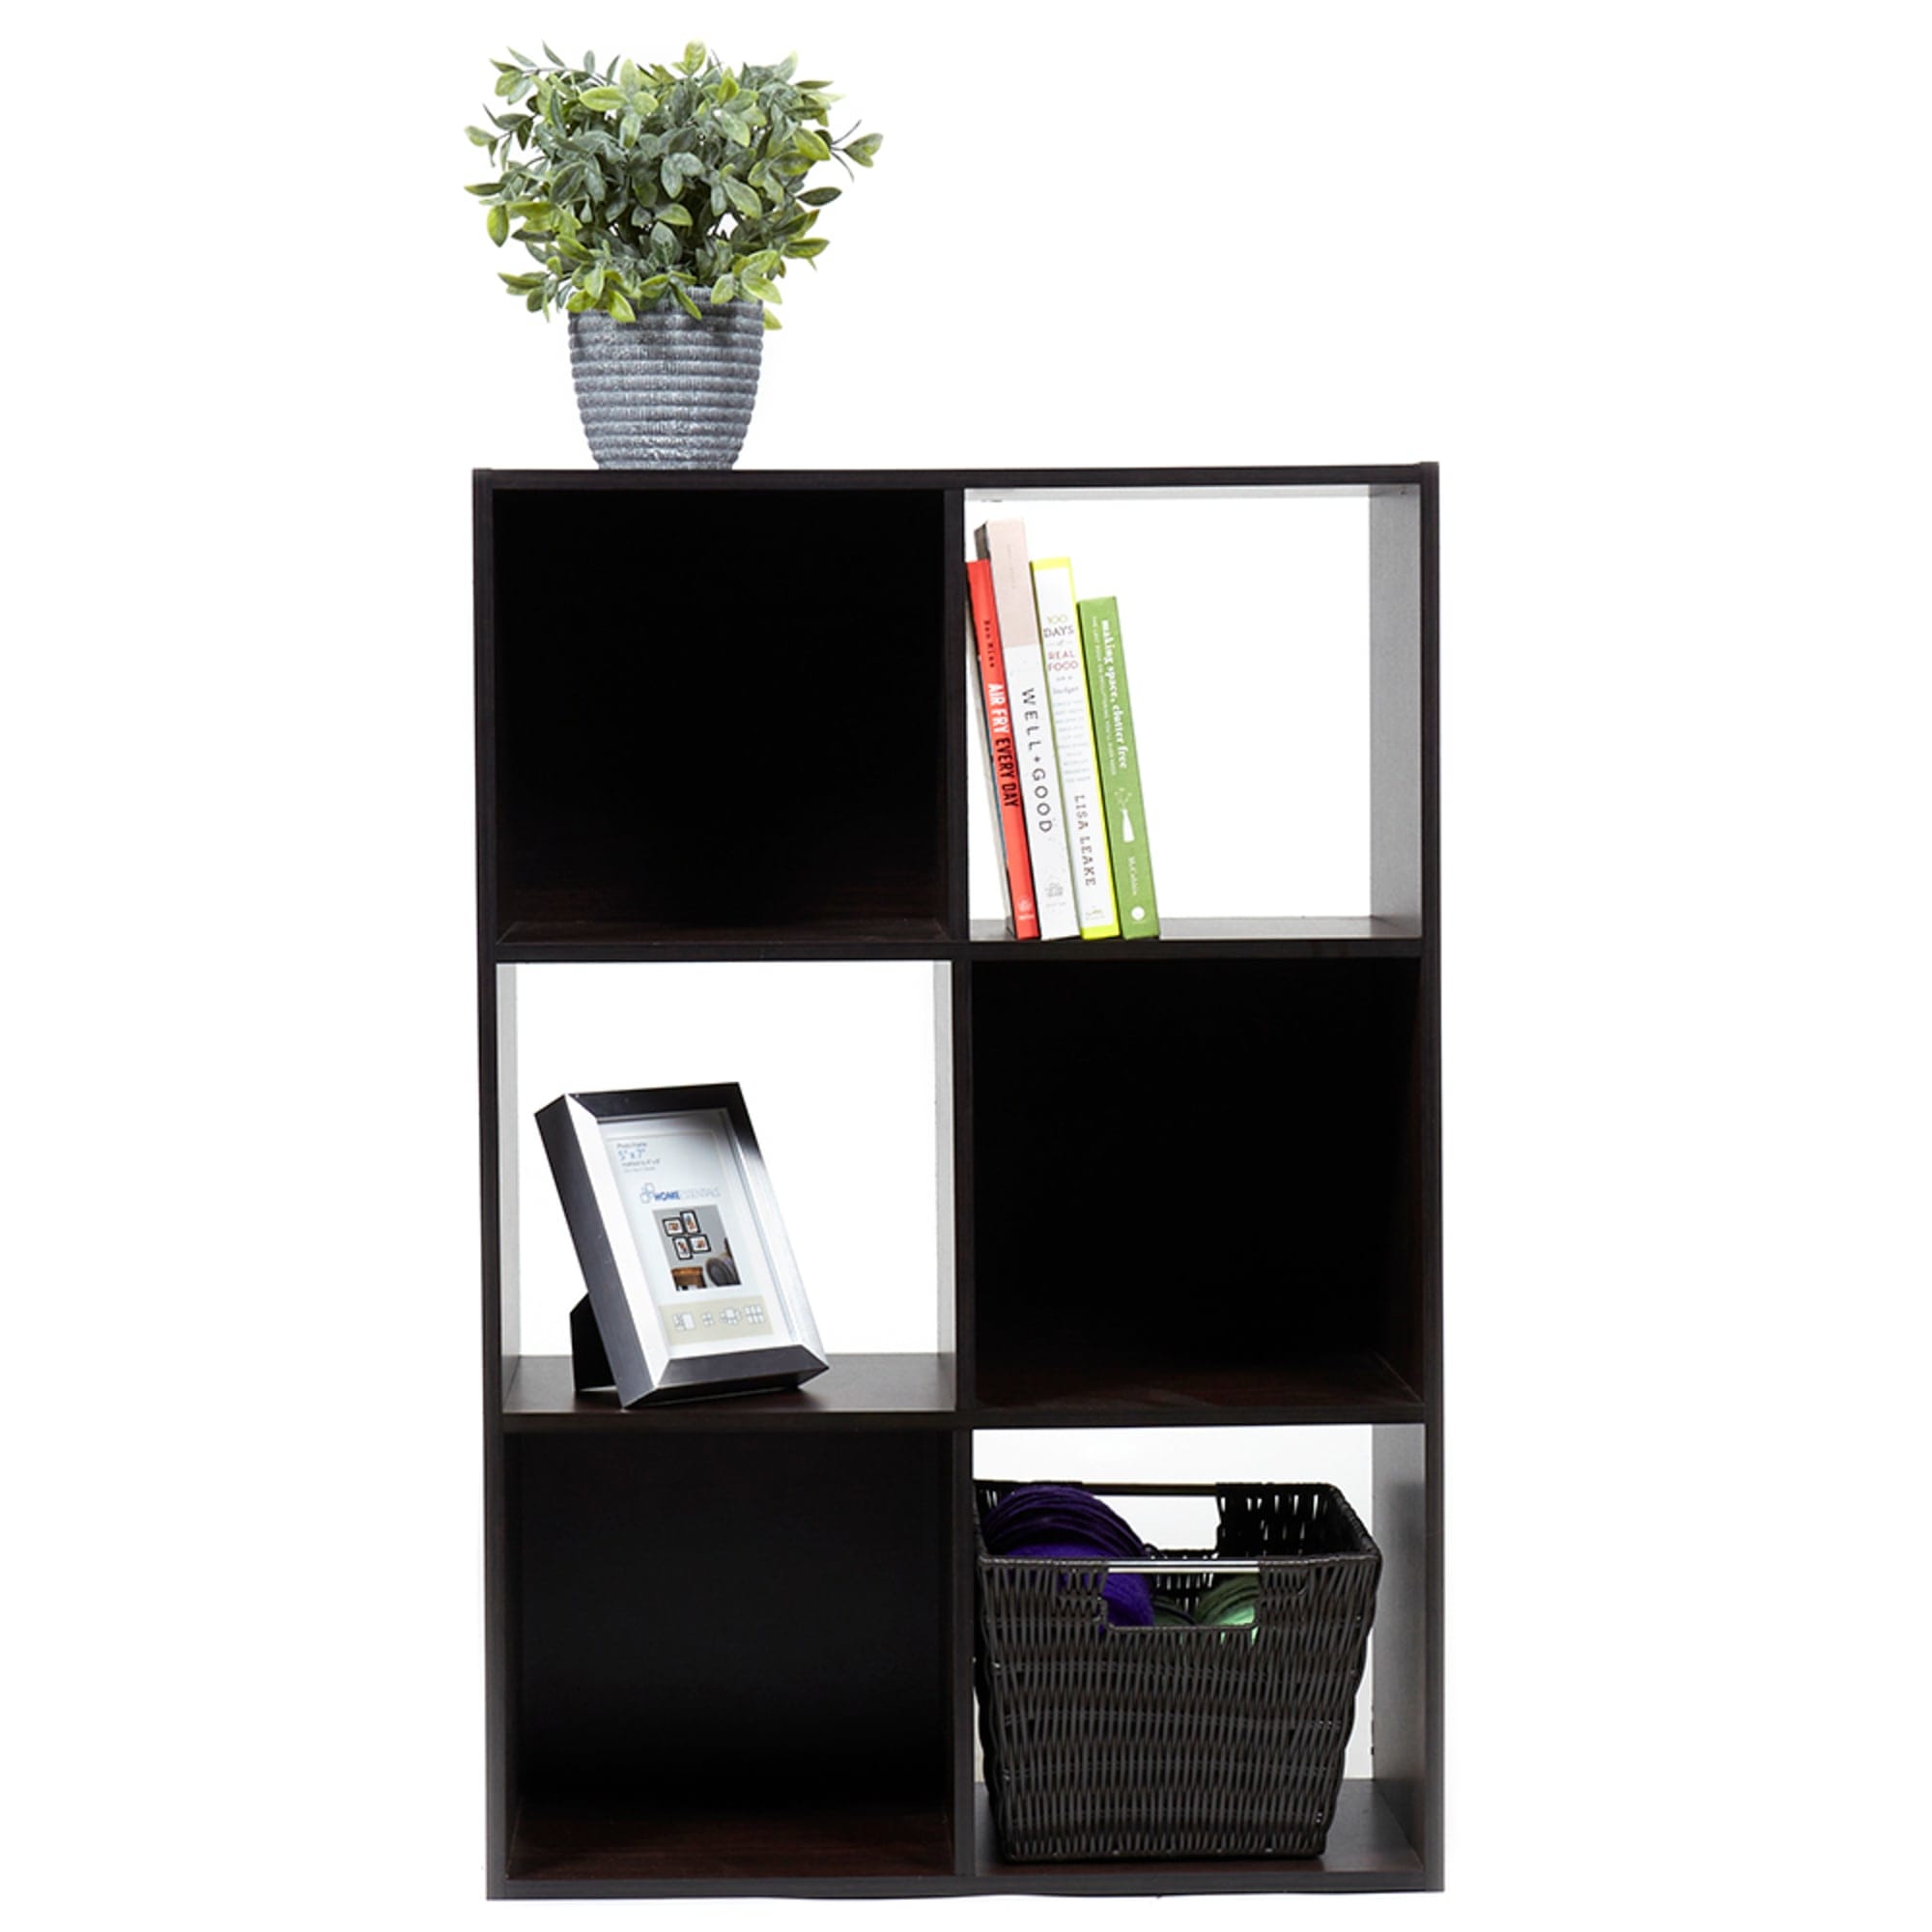 Home Basics Open and Enclosed 6 Cube MDF Storage Organizer, Espresso $40 EACH, CASE PACK OF 1